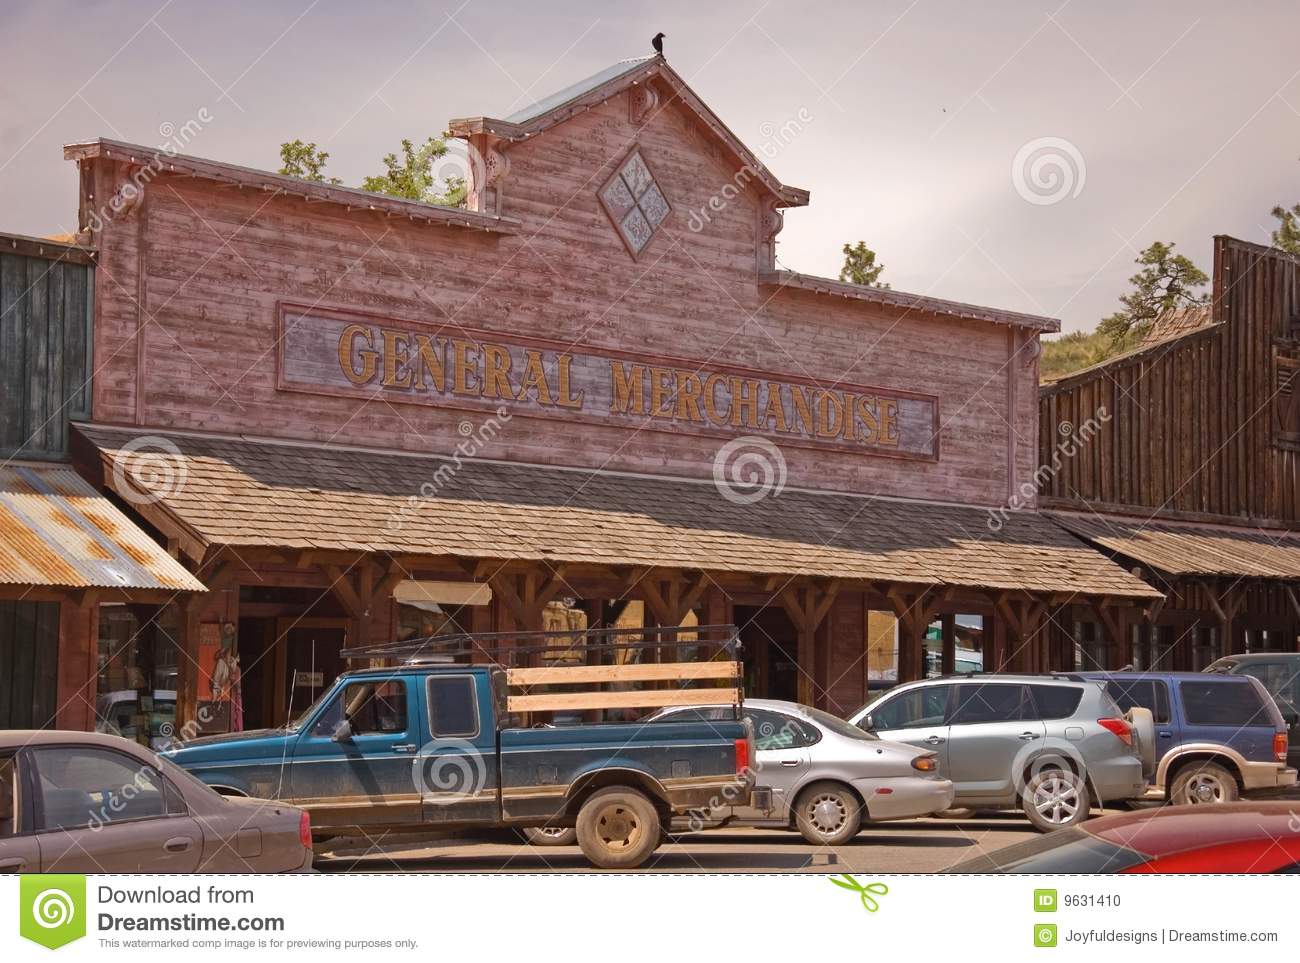 This Photo Shows An Old Western Type General Merchandise Store Of    